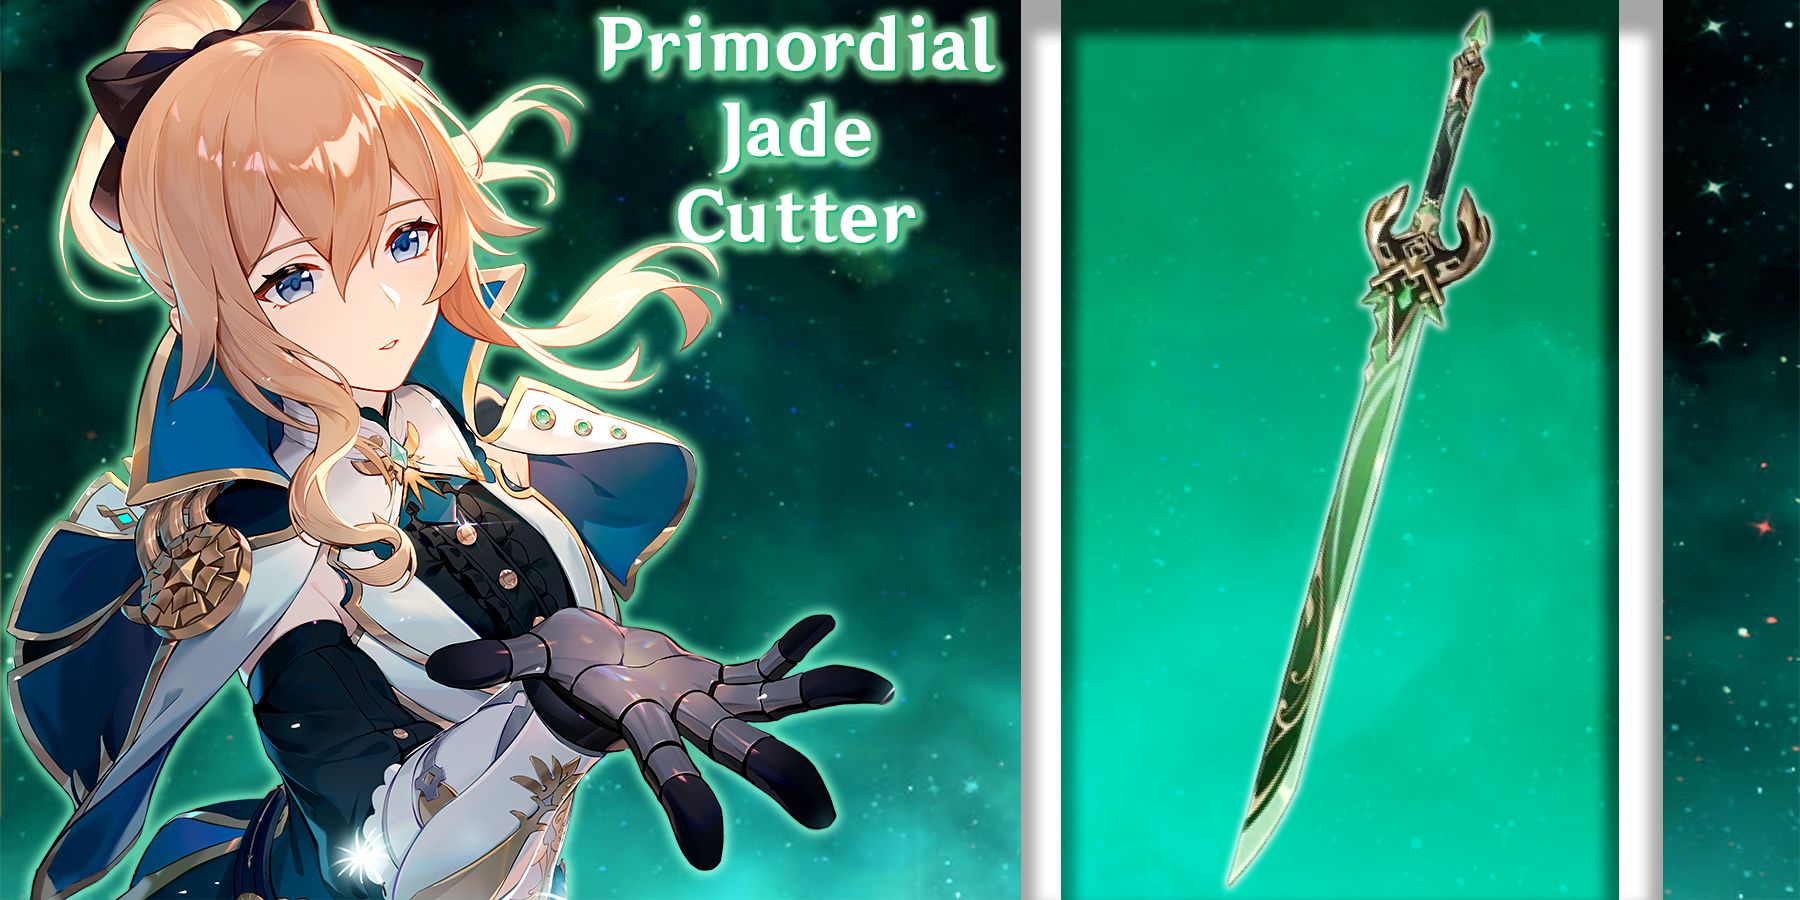 jean and primordial jade cutter in genshin impact